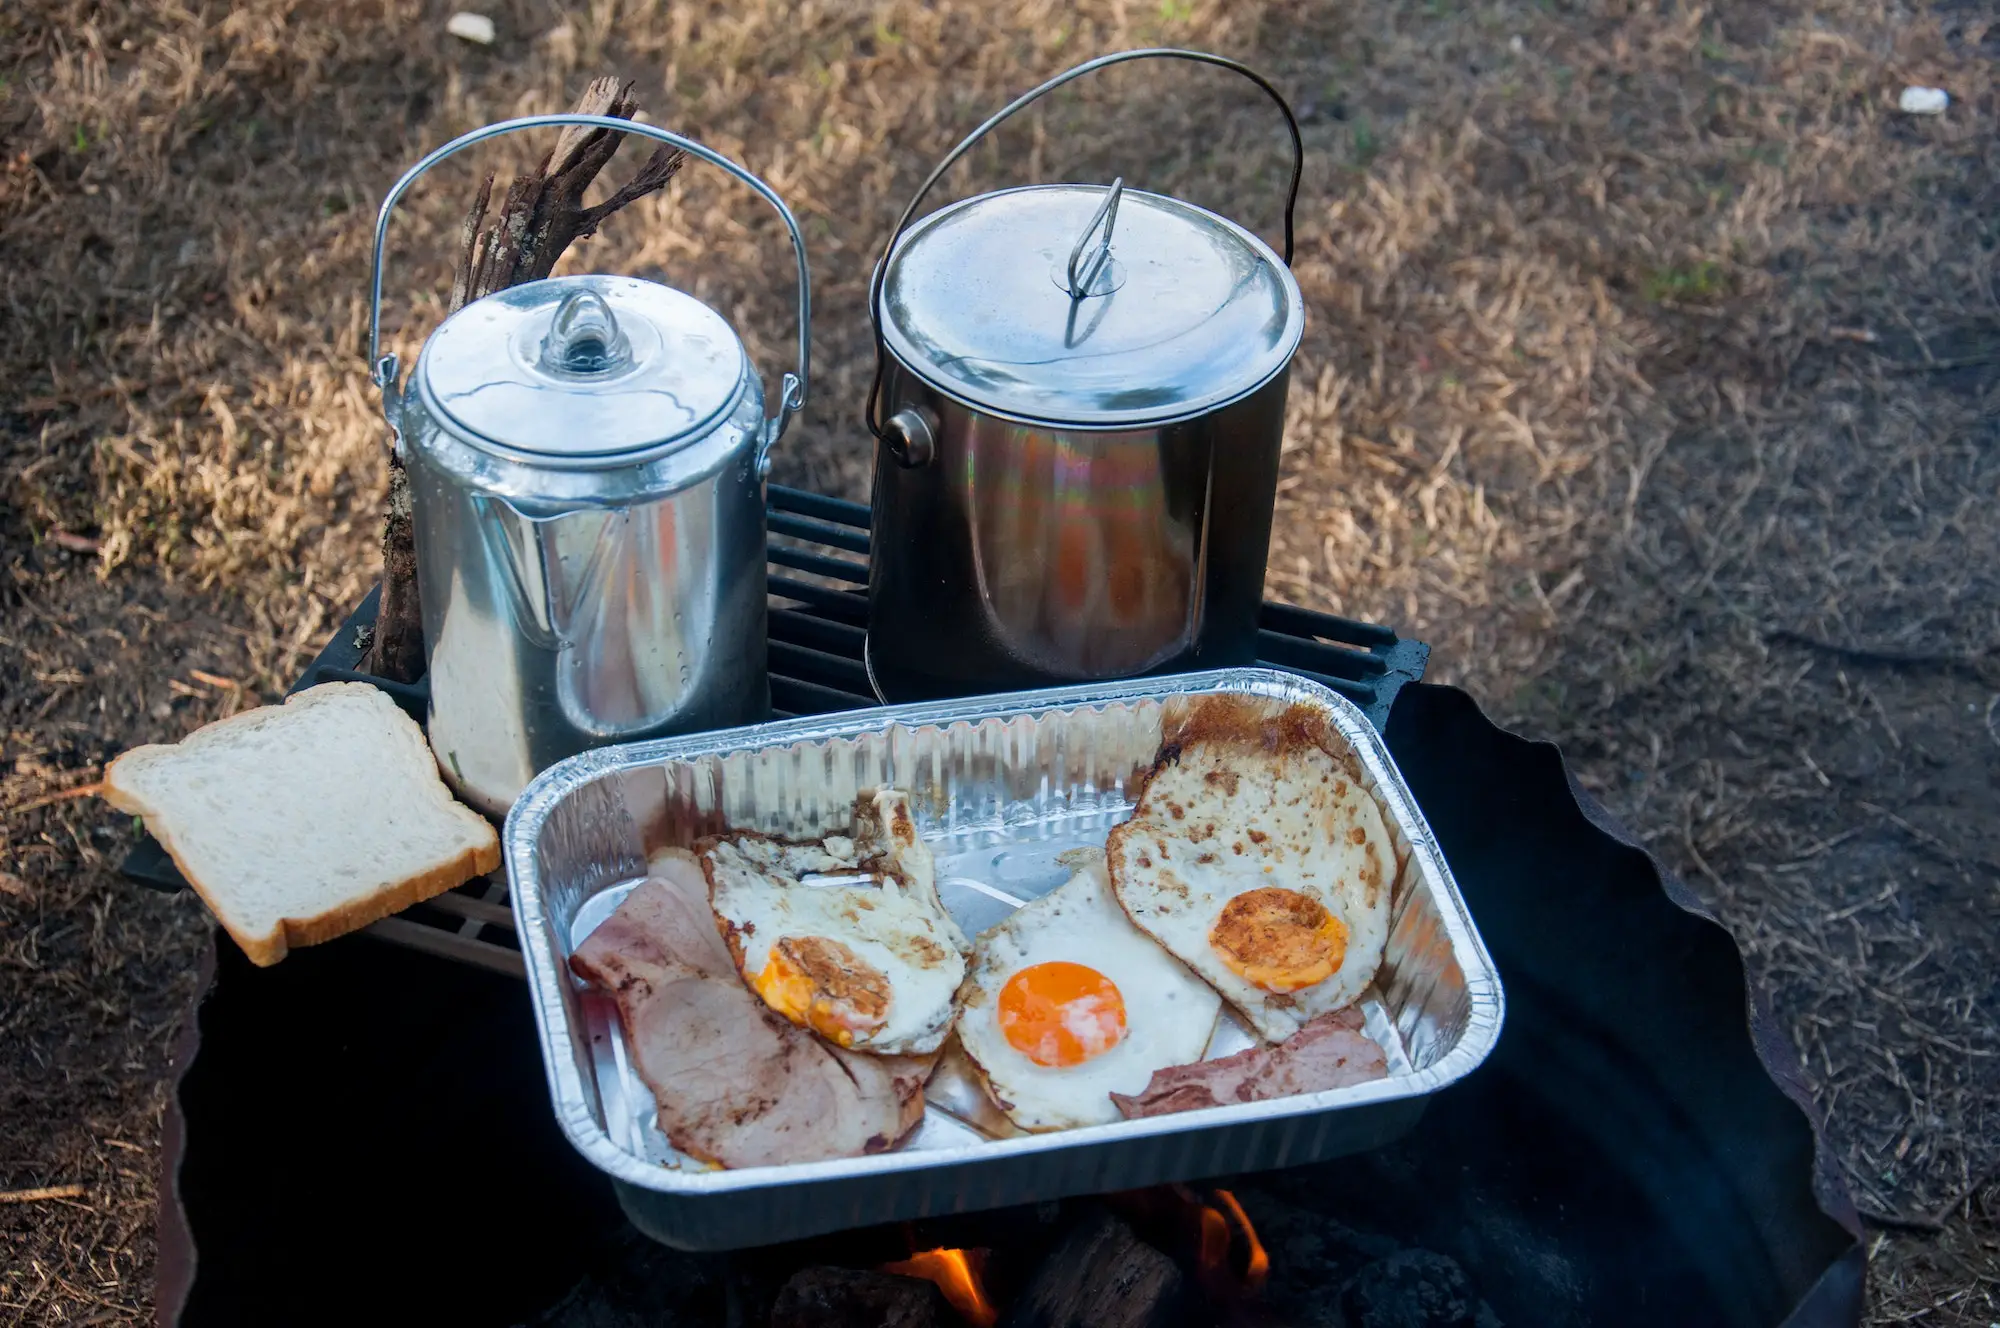 The perfect camping breakfast - bacon, eggs, bread and coffee in billy tin